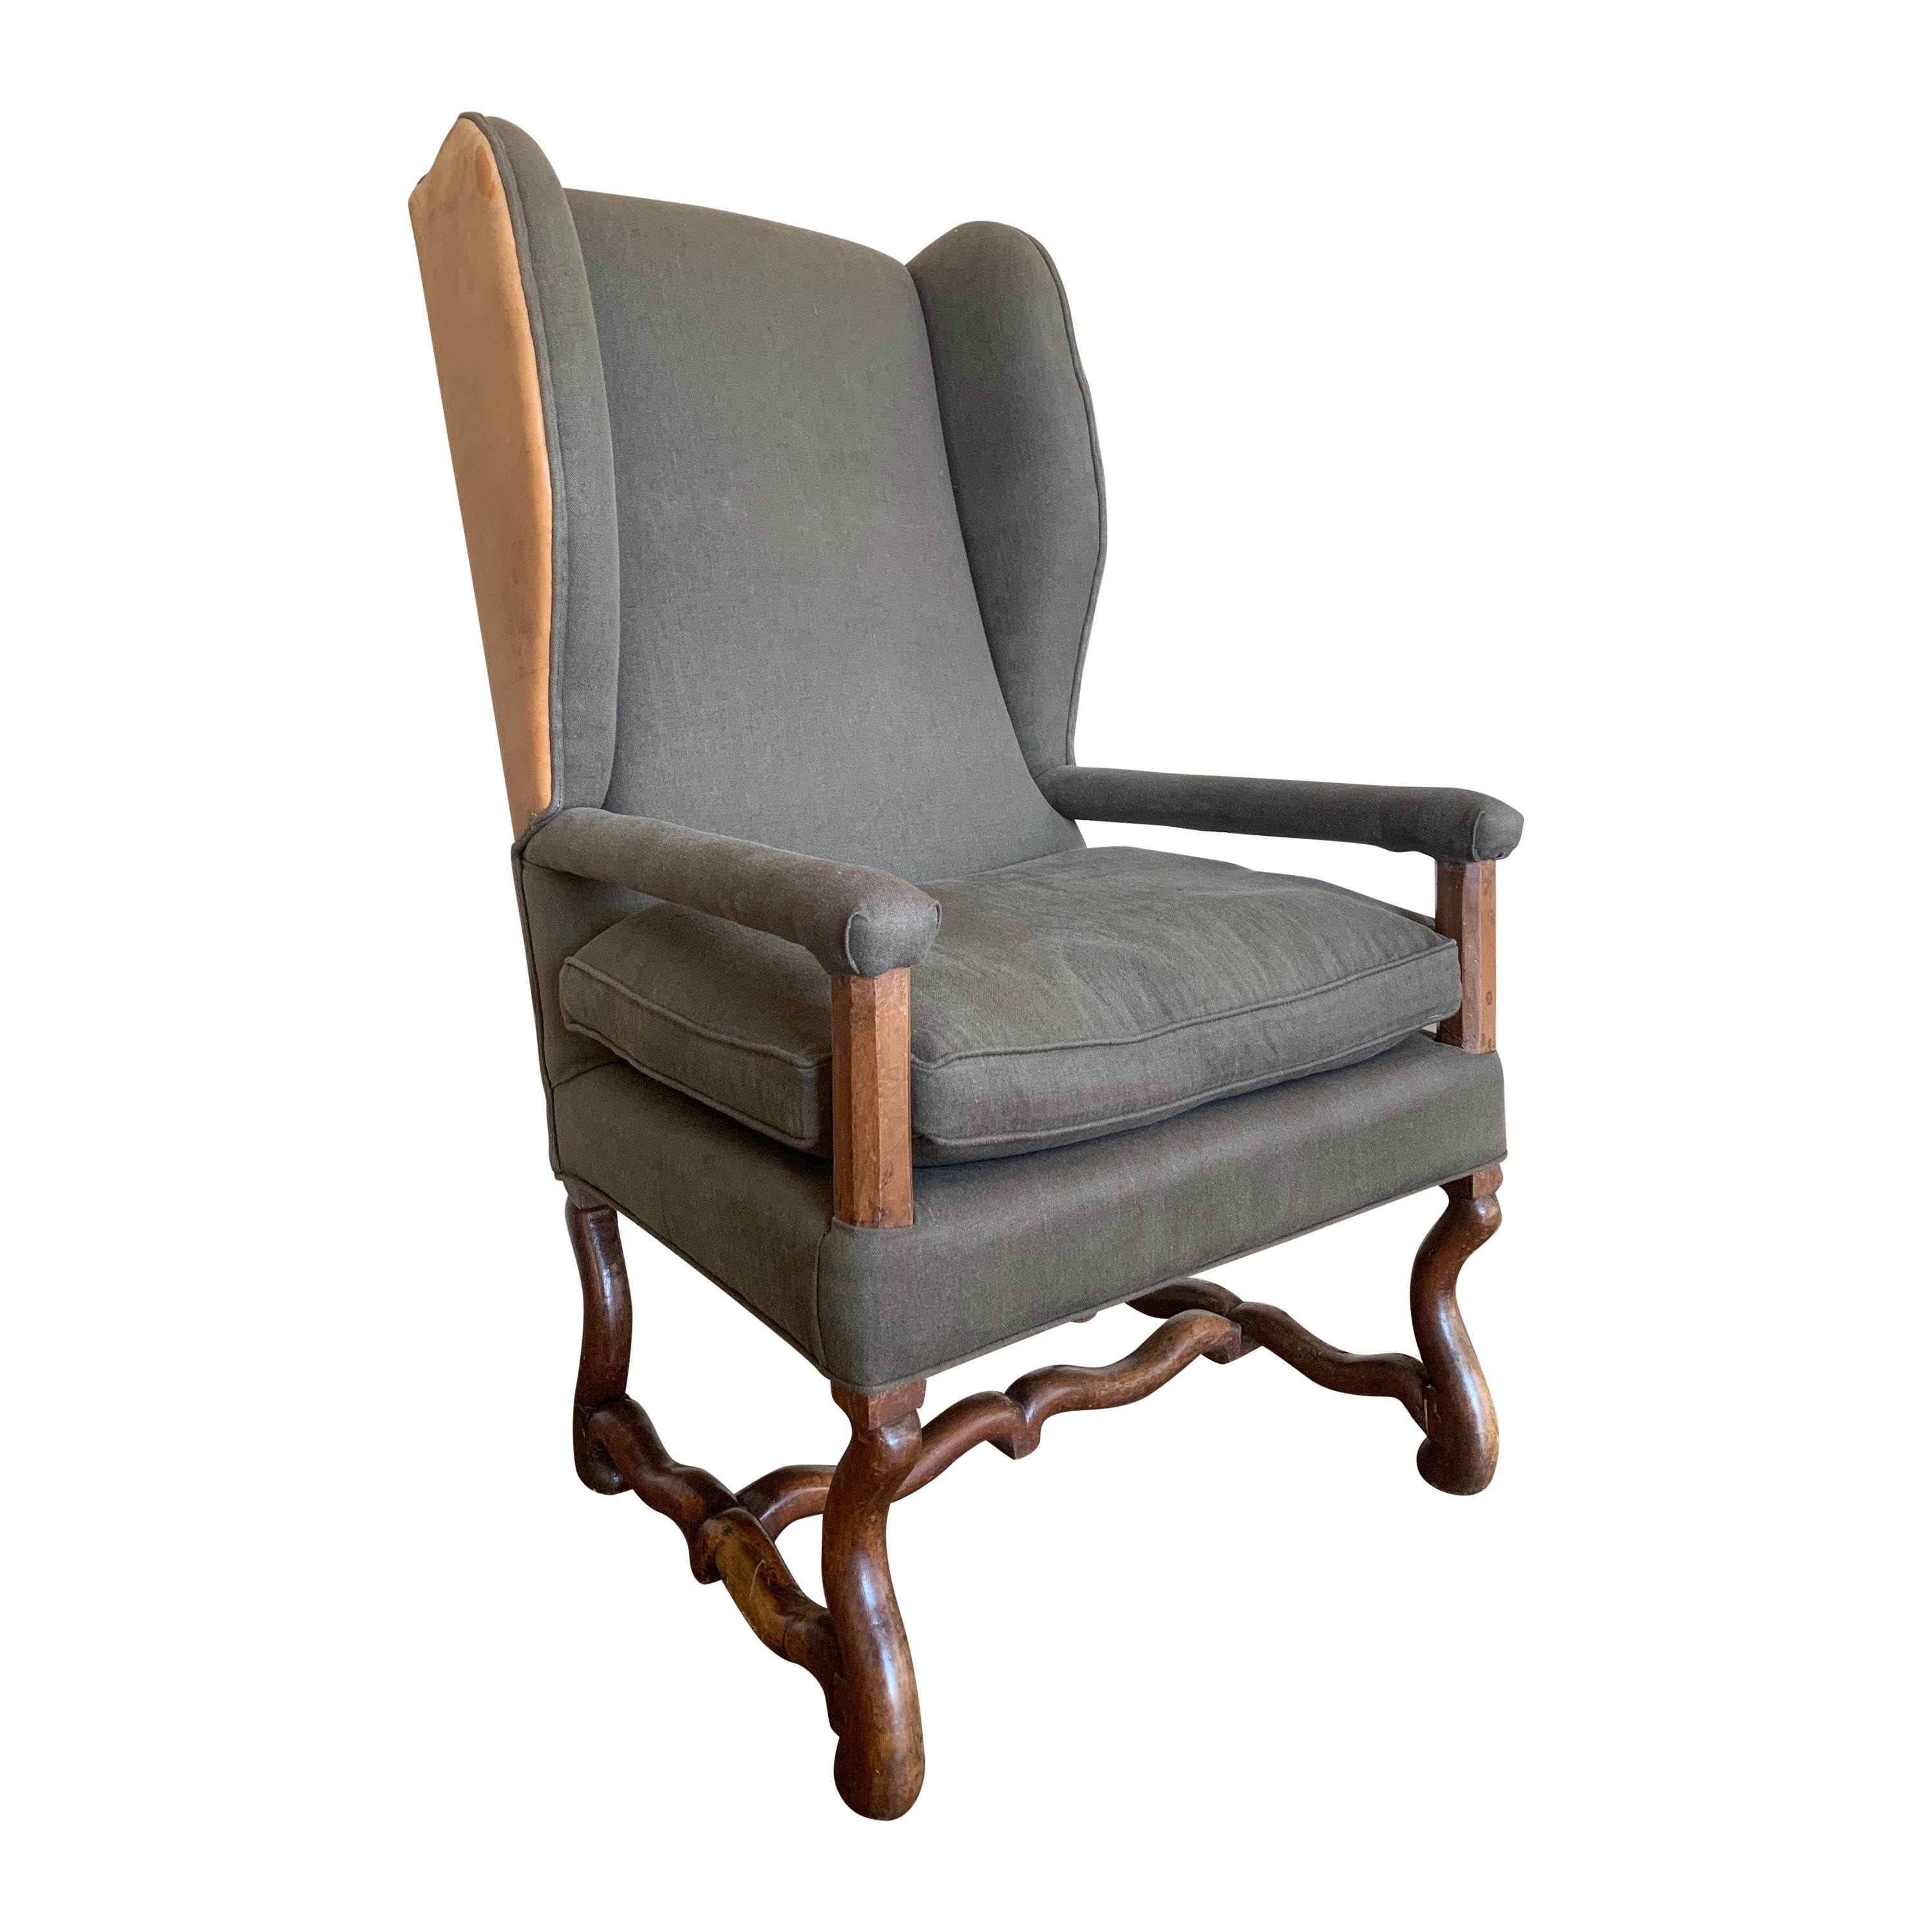 Early 18th Century French Wingchair